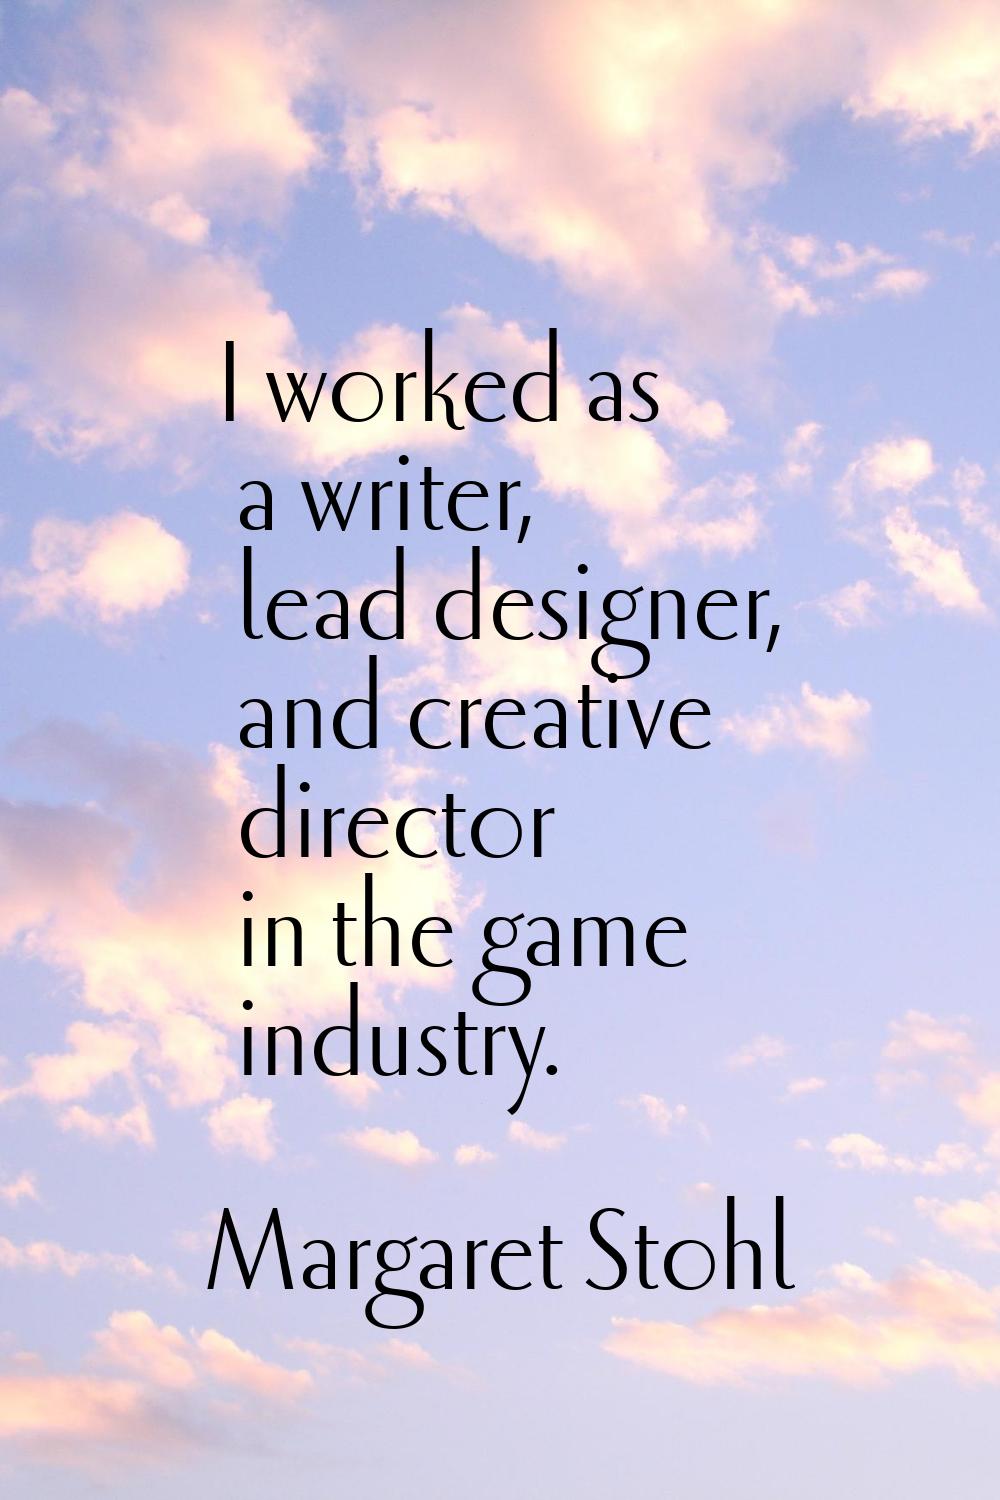 I worked as a writer, lead designer, and creative director in the game industry.